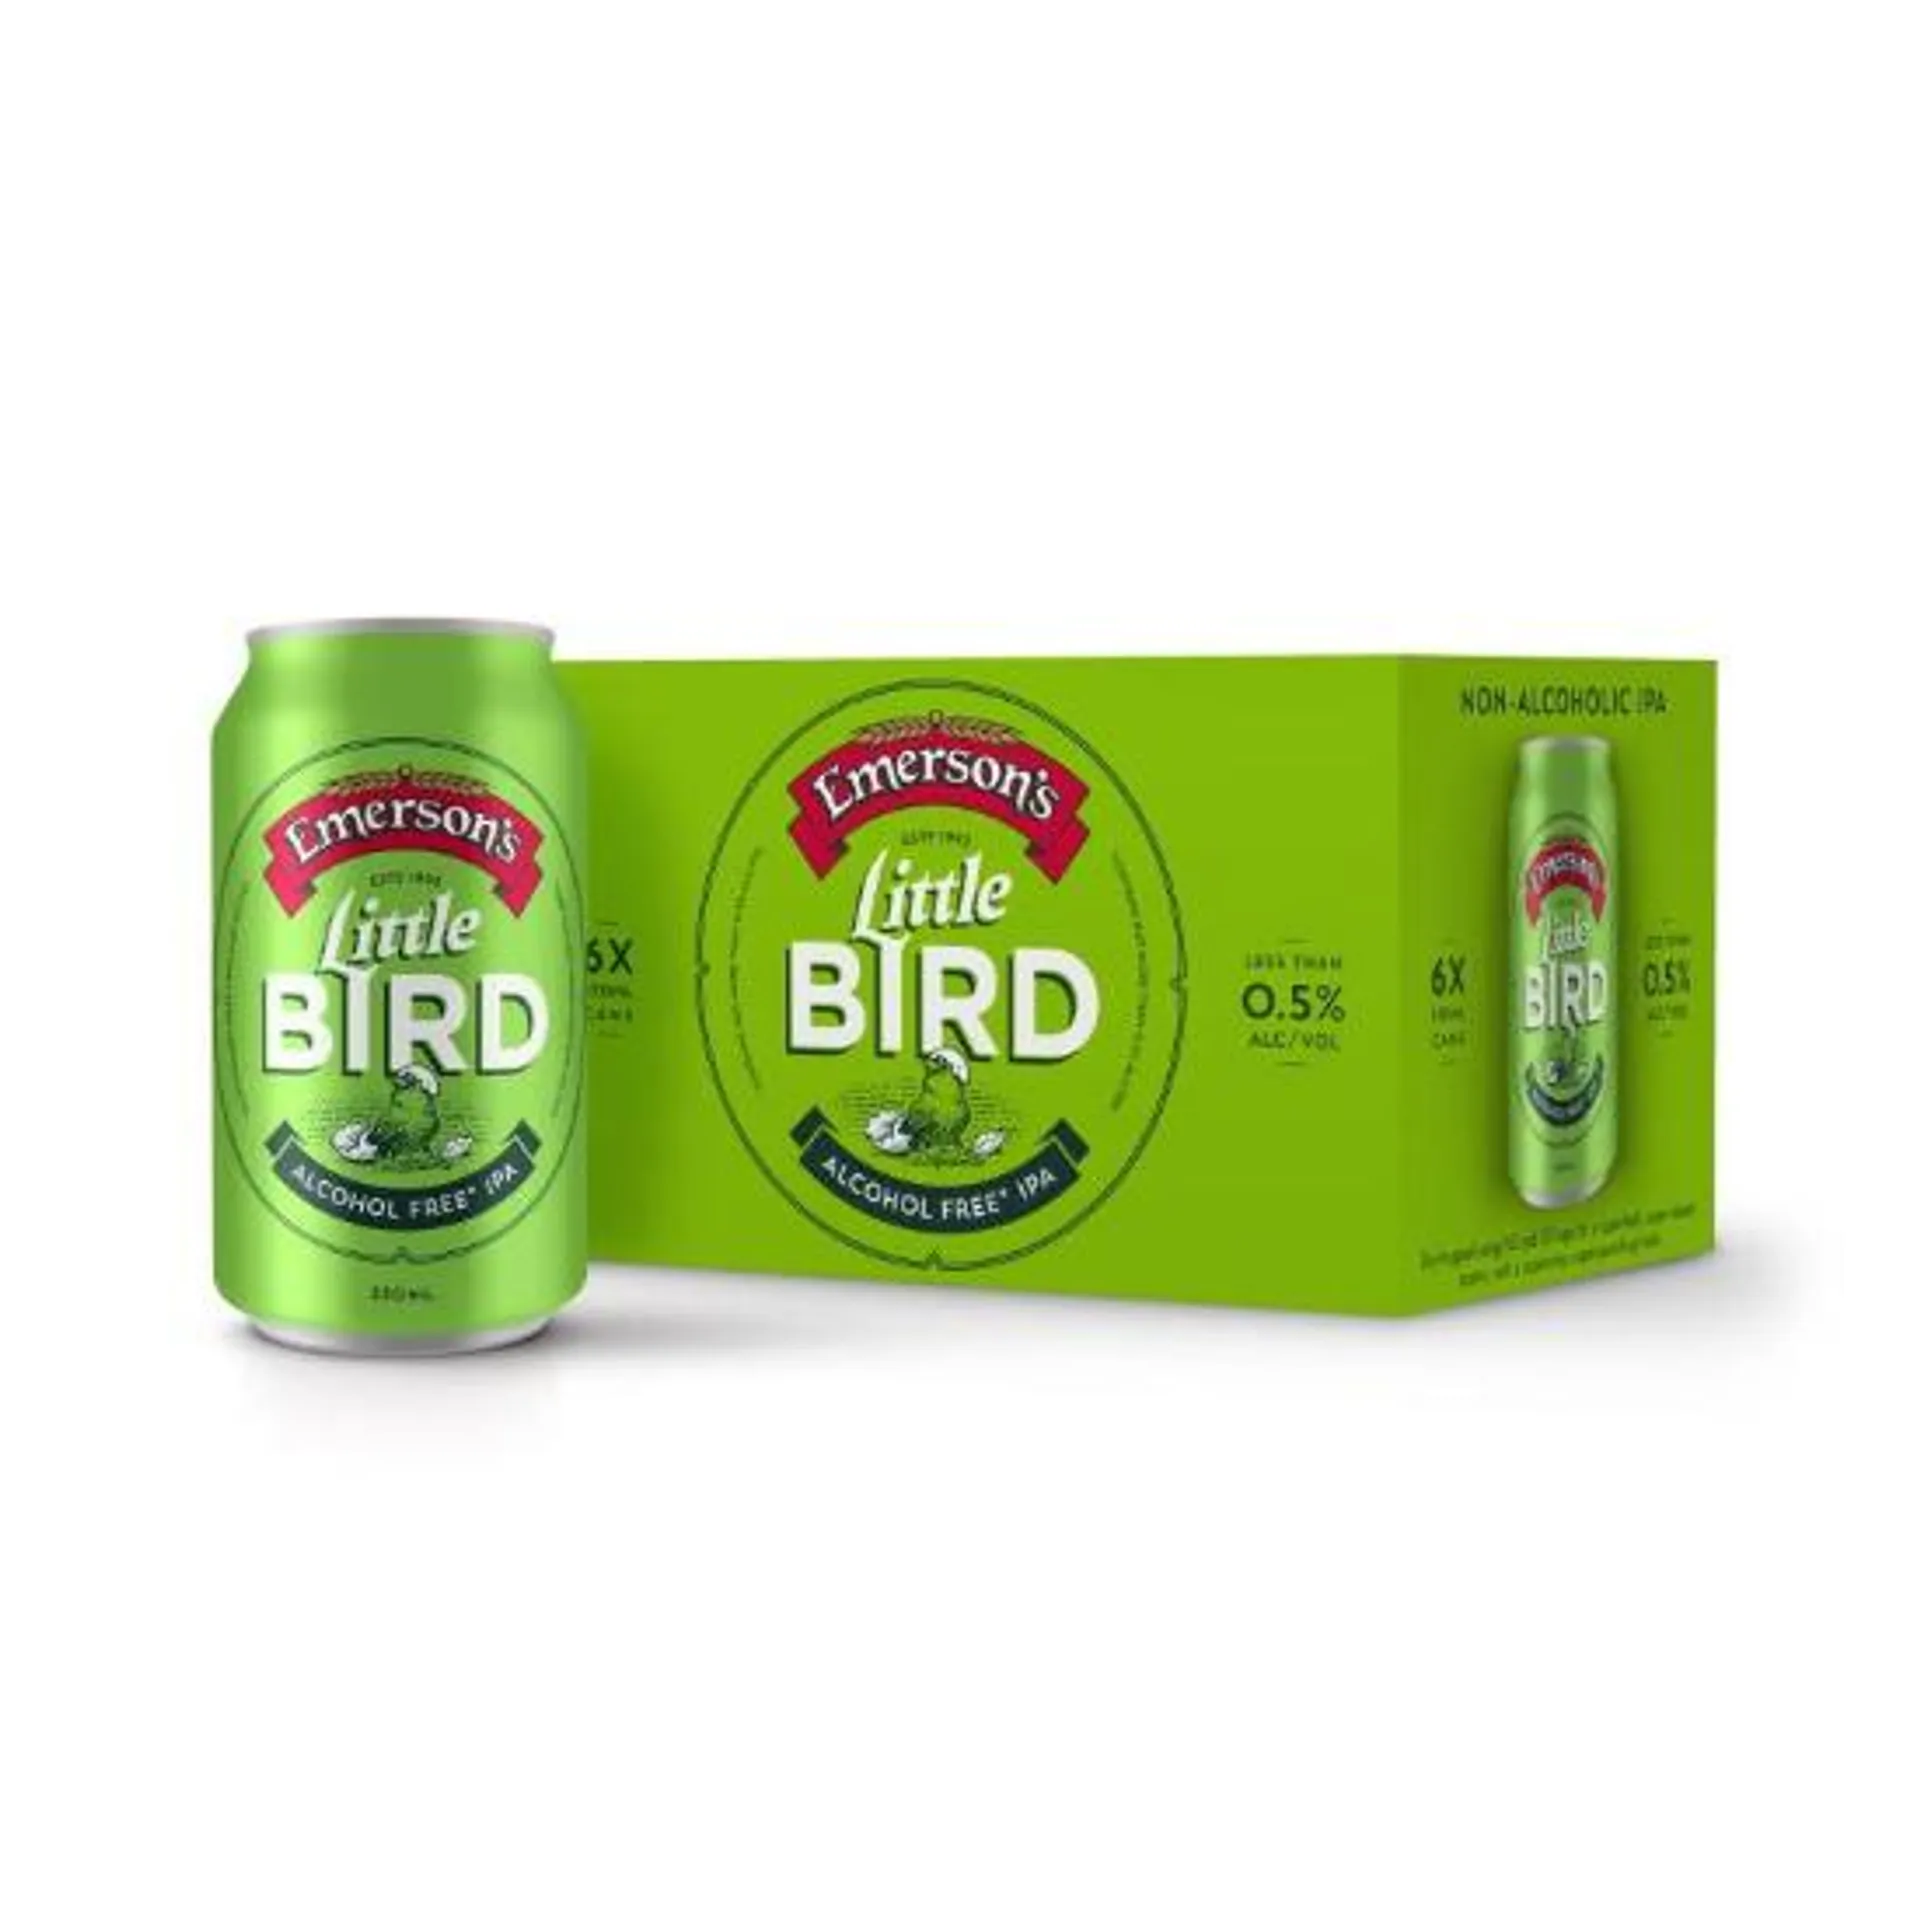 Emerson's Little Bird Alcohol Free IPA Cans 6x330ml